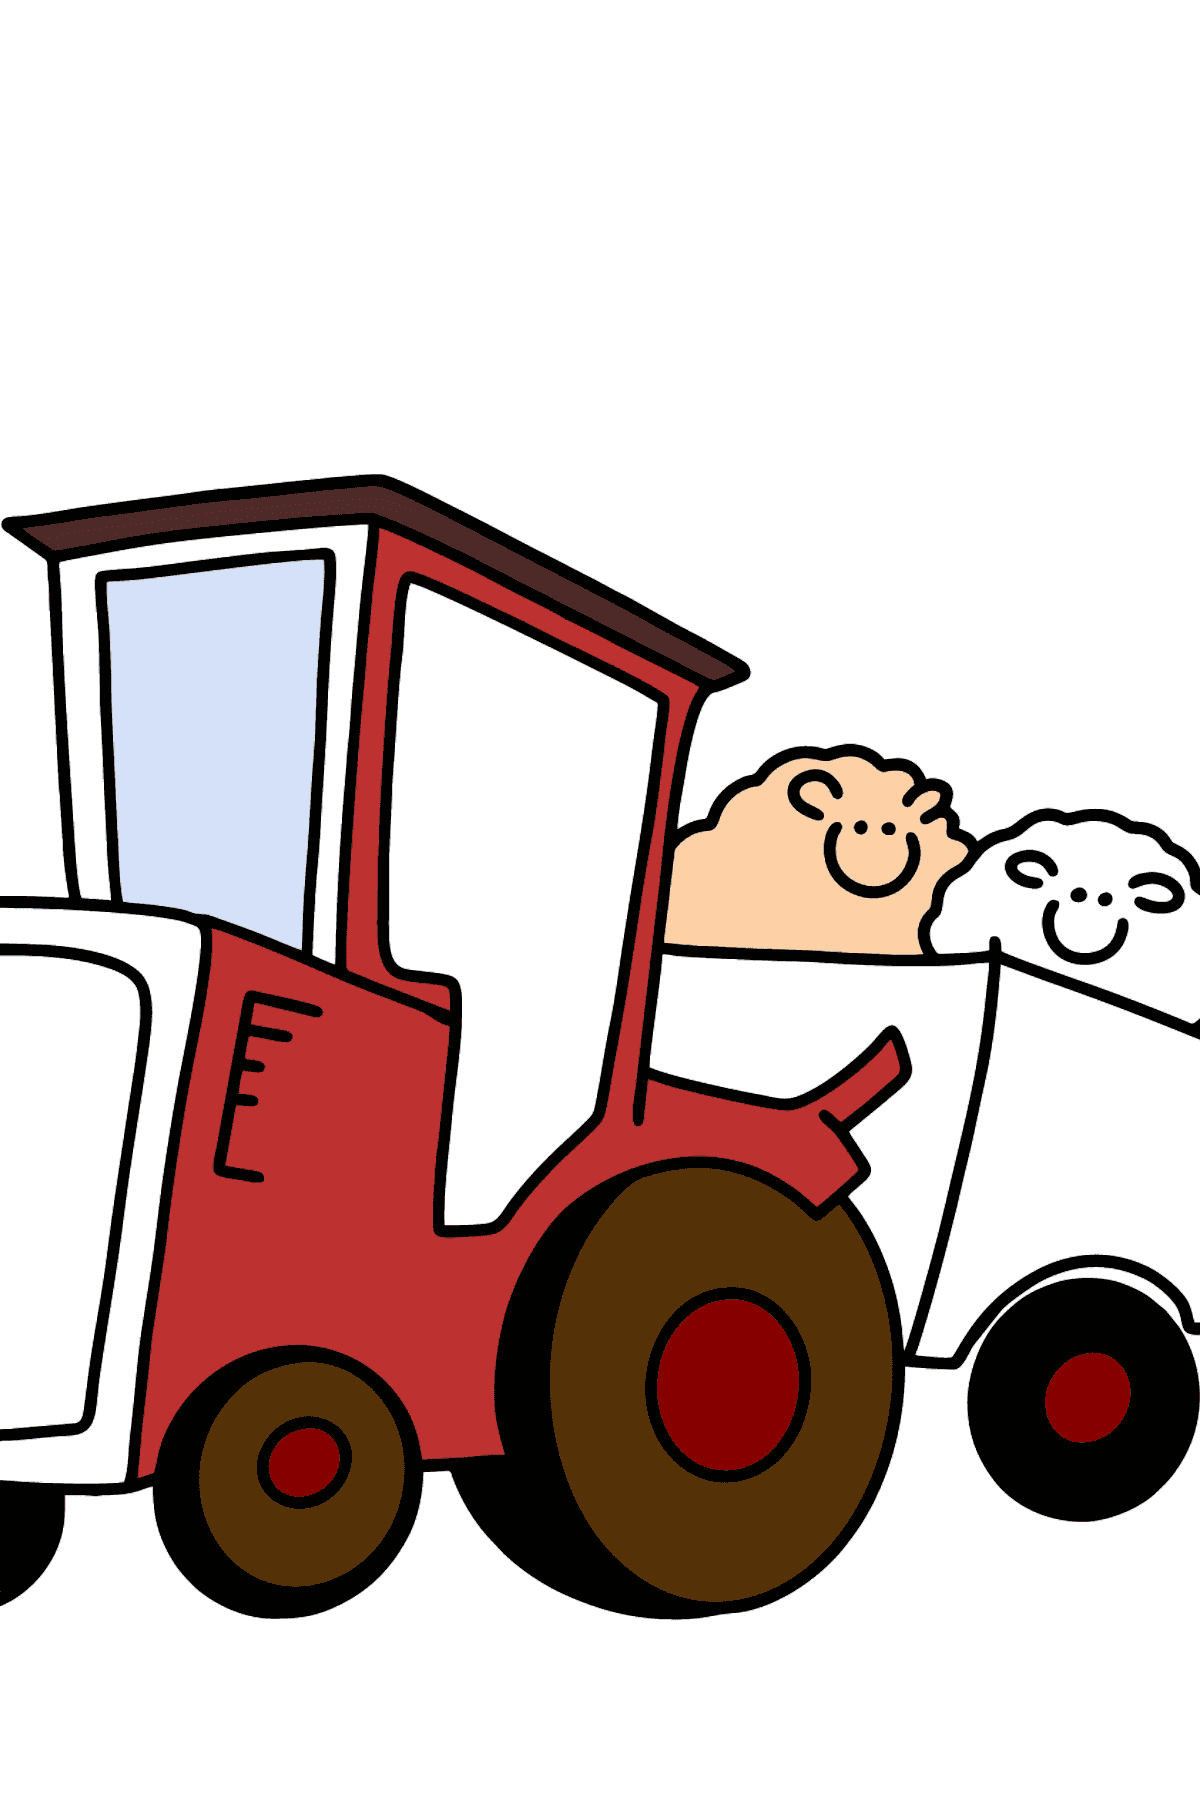 Tractor with Sheep Trailer coloring page - Coloring Pages for Kids